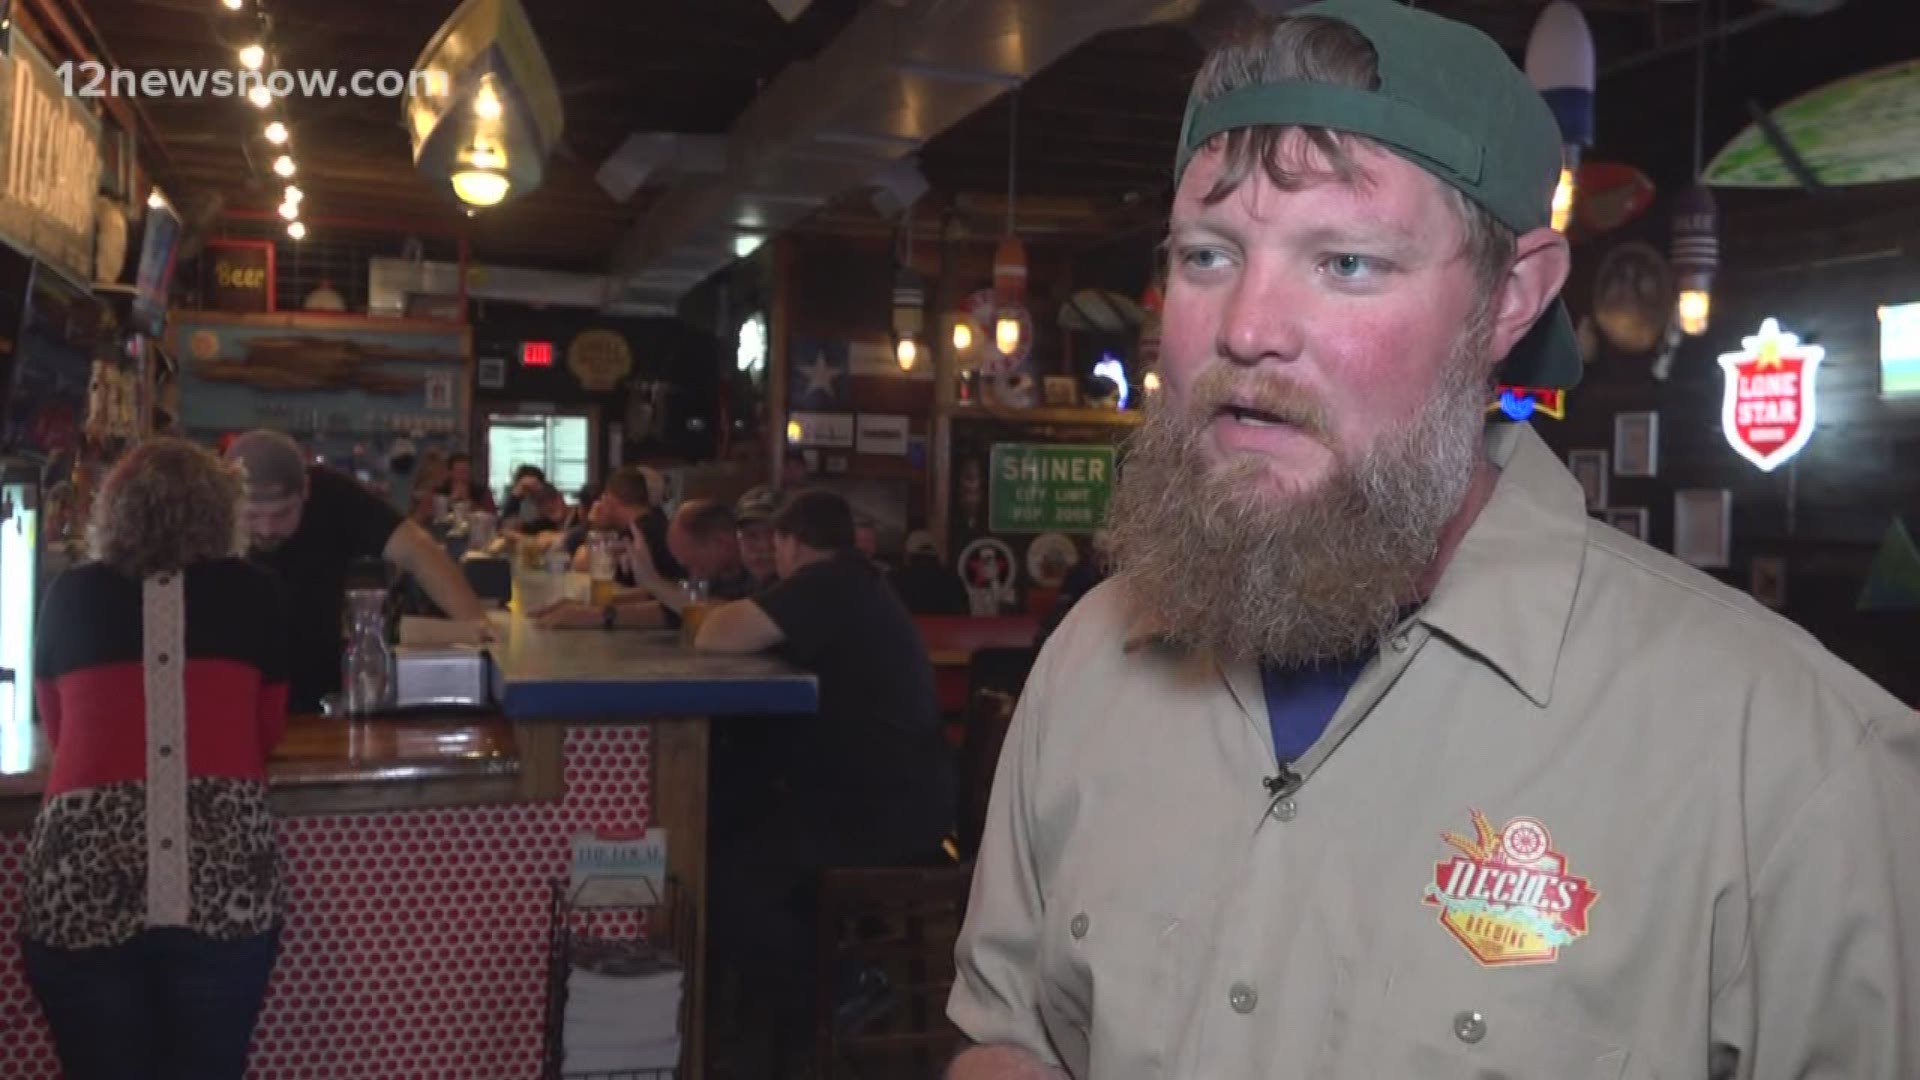 The pepper-infused beer is on tap at Neches Brewing Company